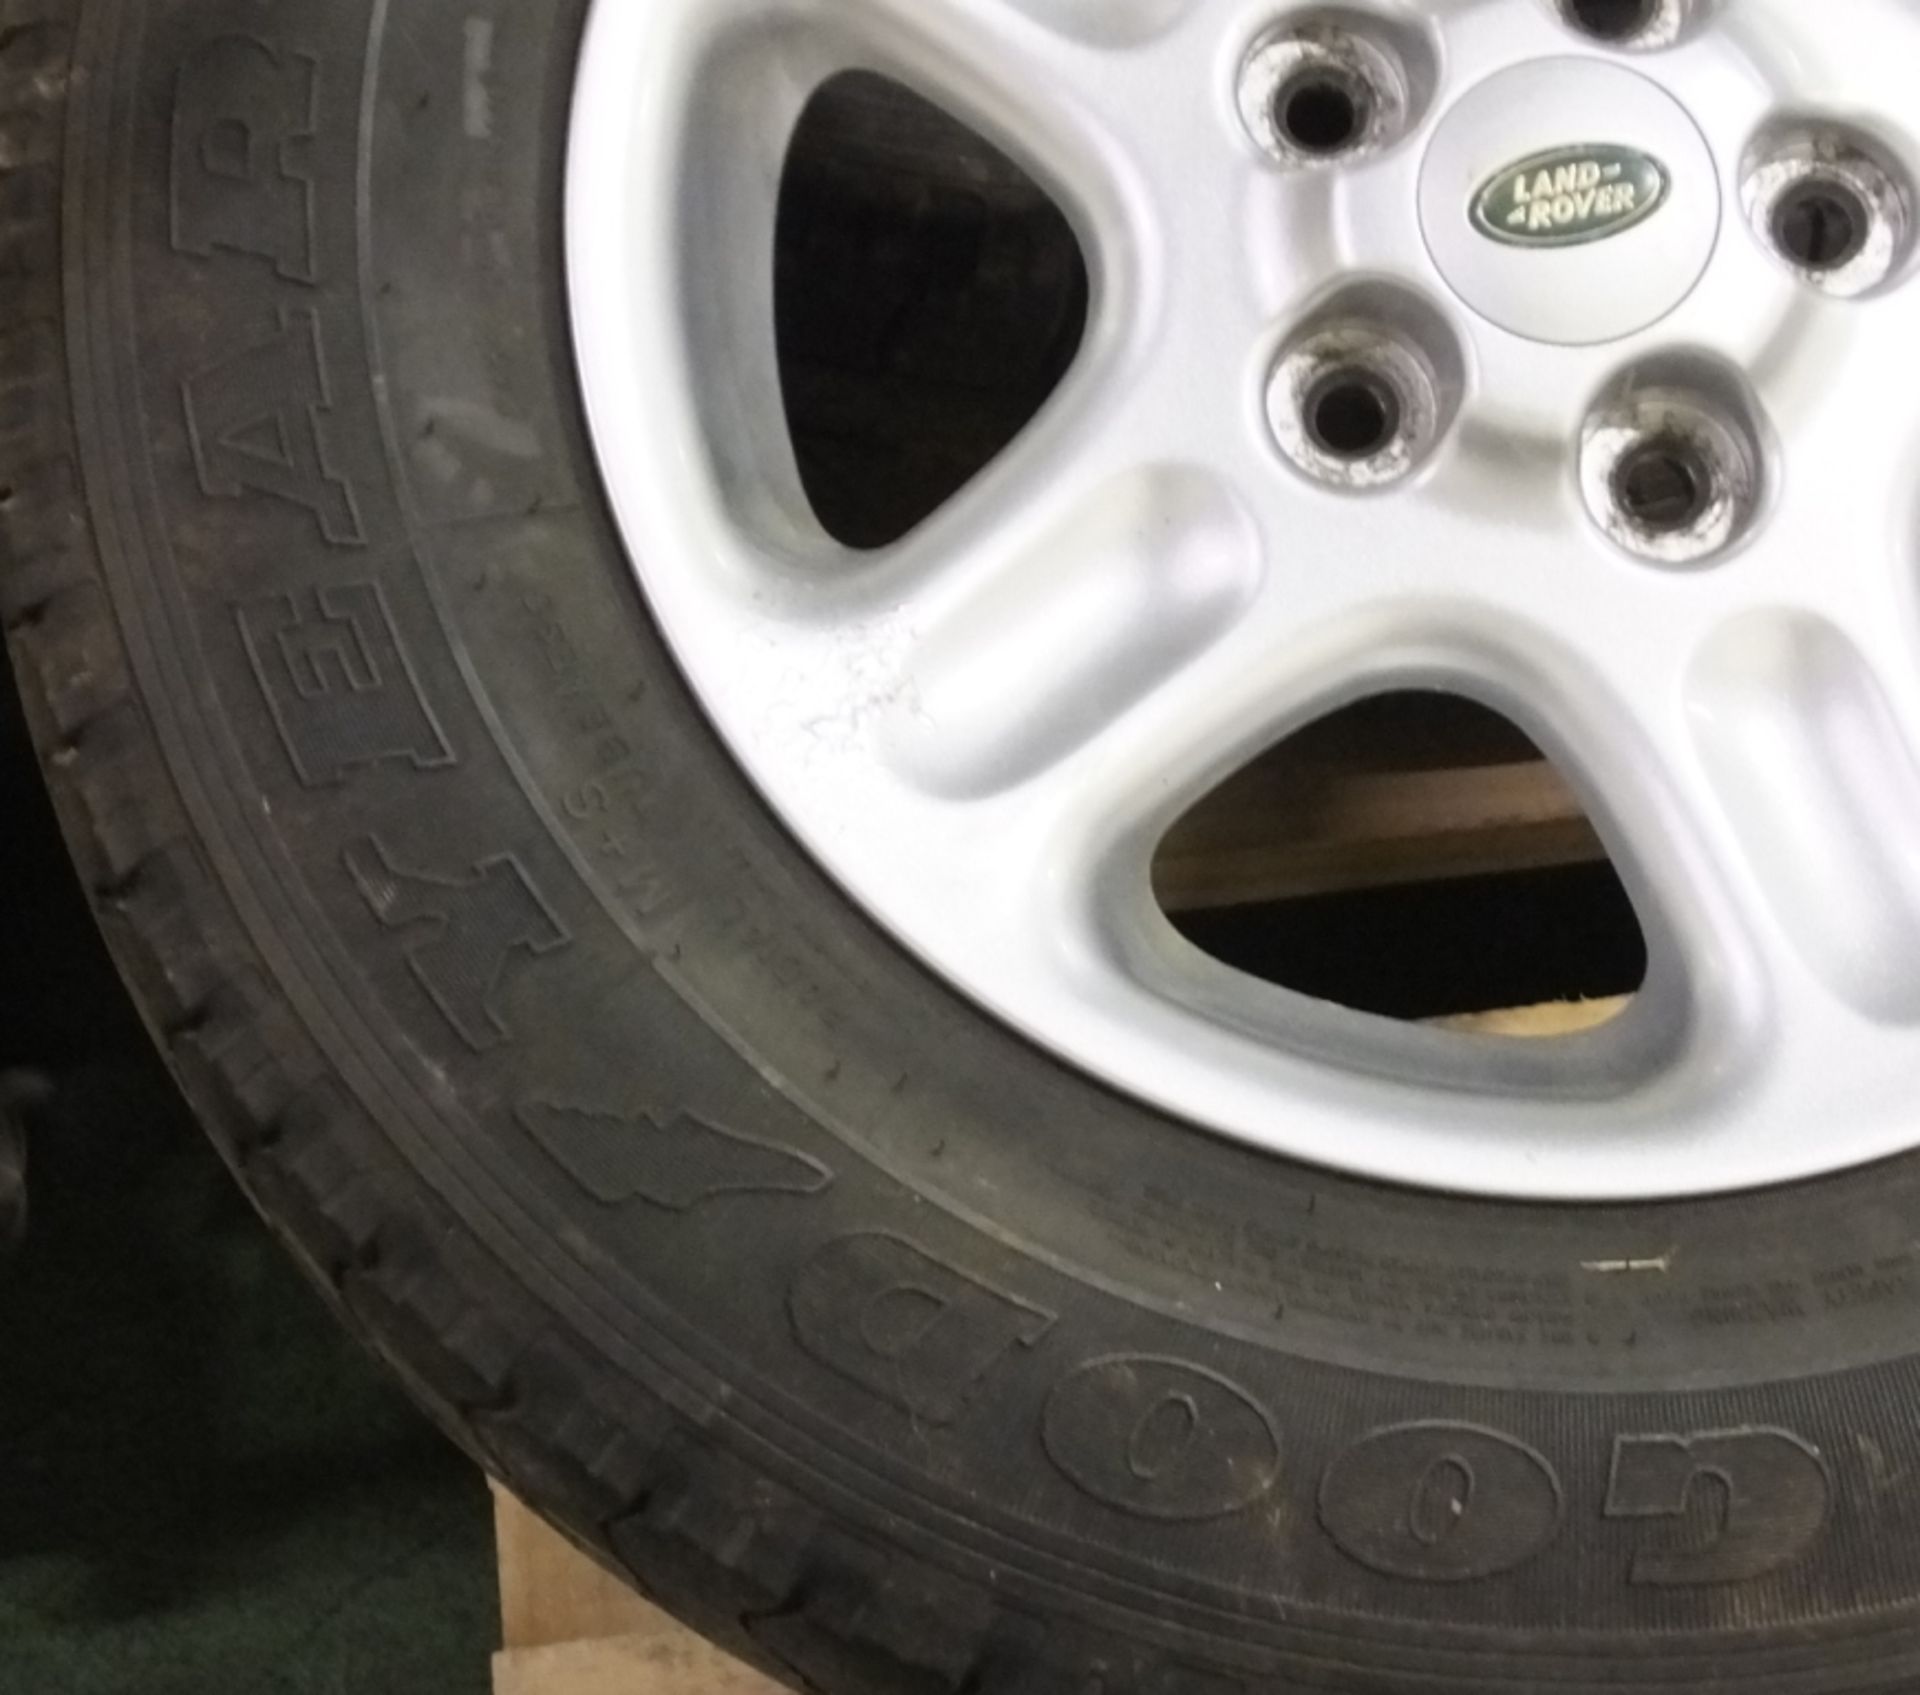 4x Land Rover Freelander wheels and Wrangler HP tyres - Image 4 of 6